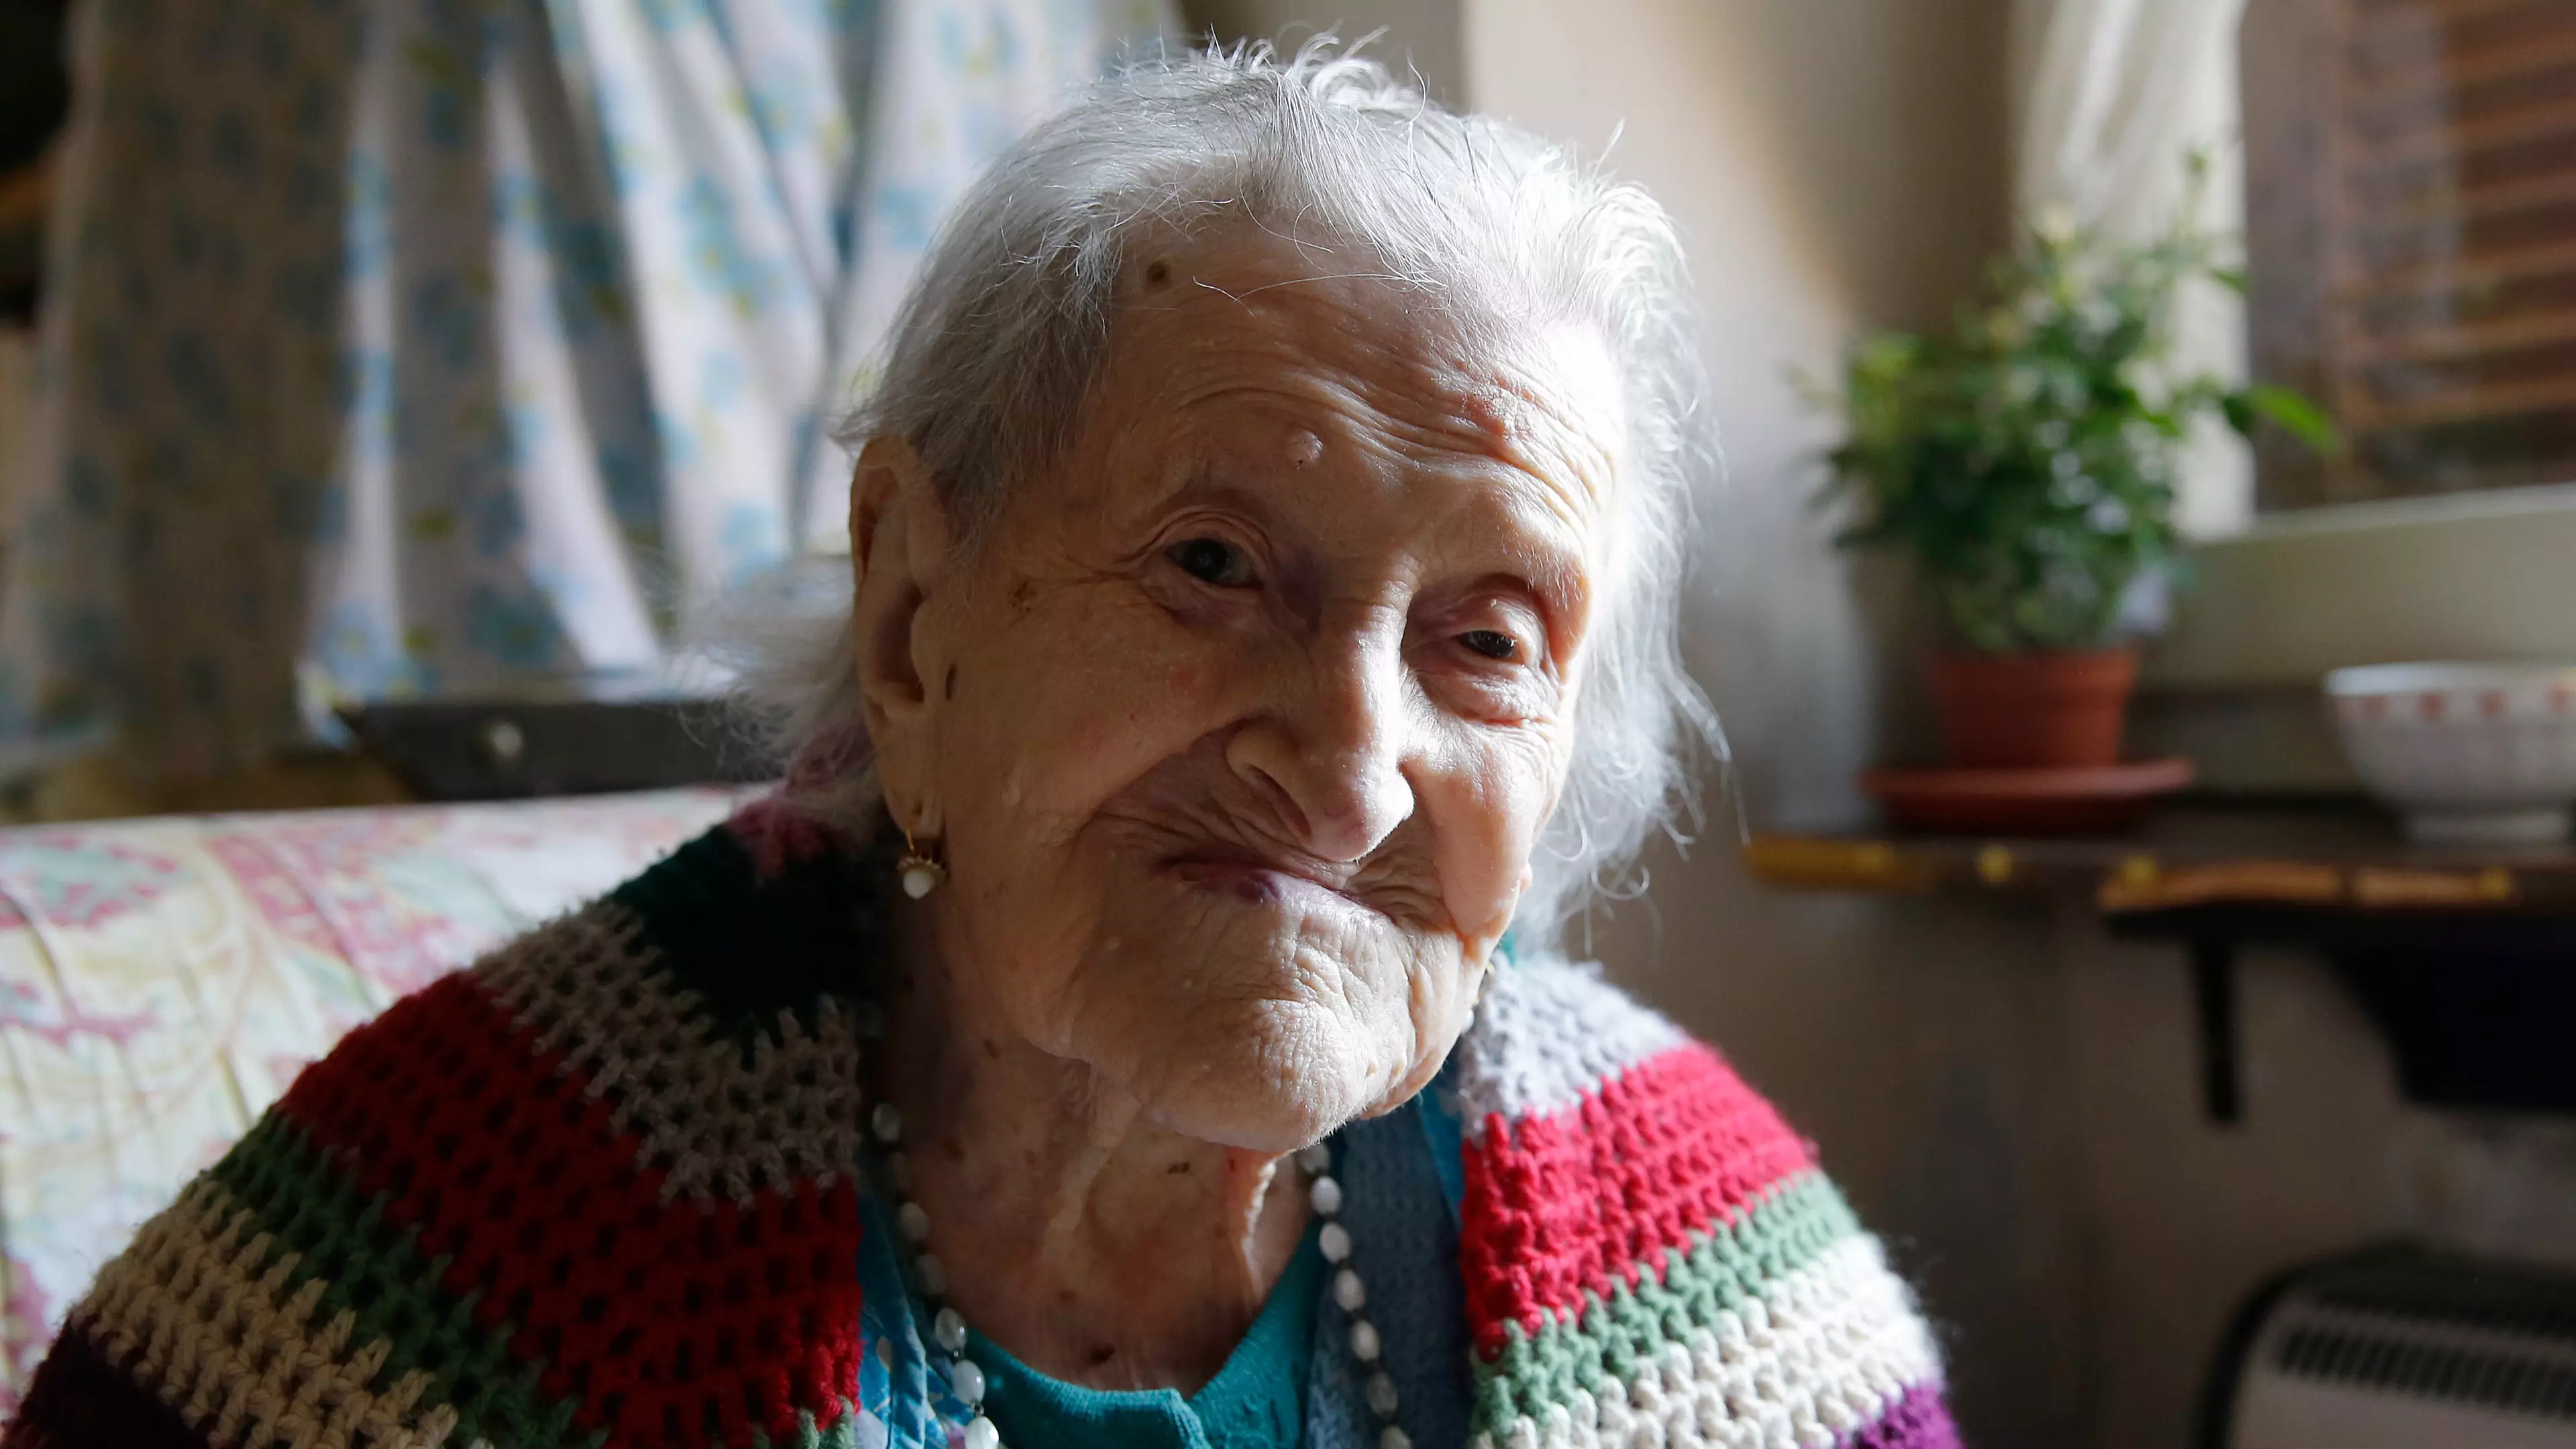 The World's Oldest Person Has Died Aged 117